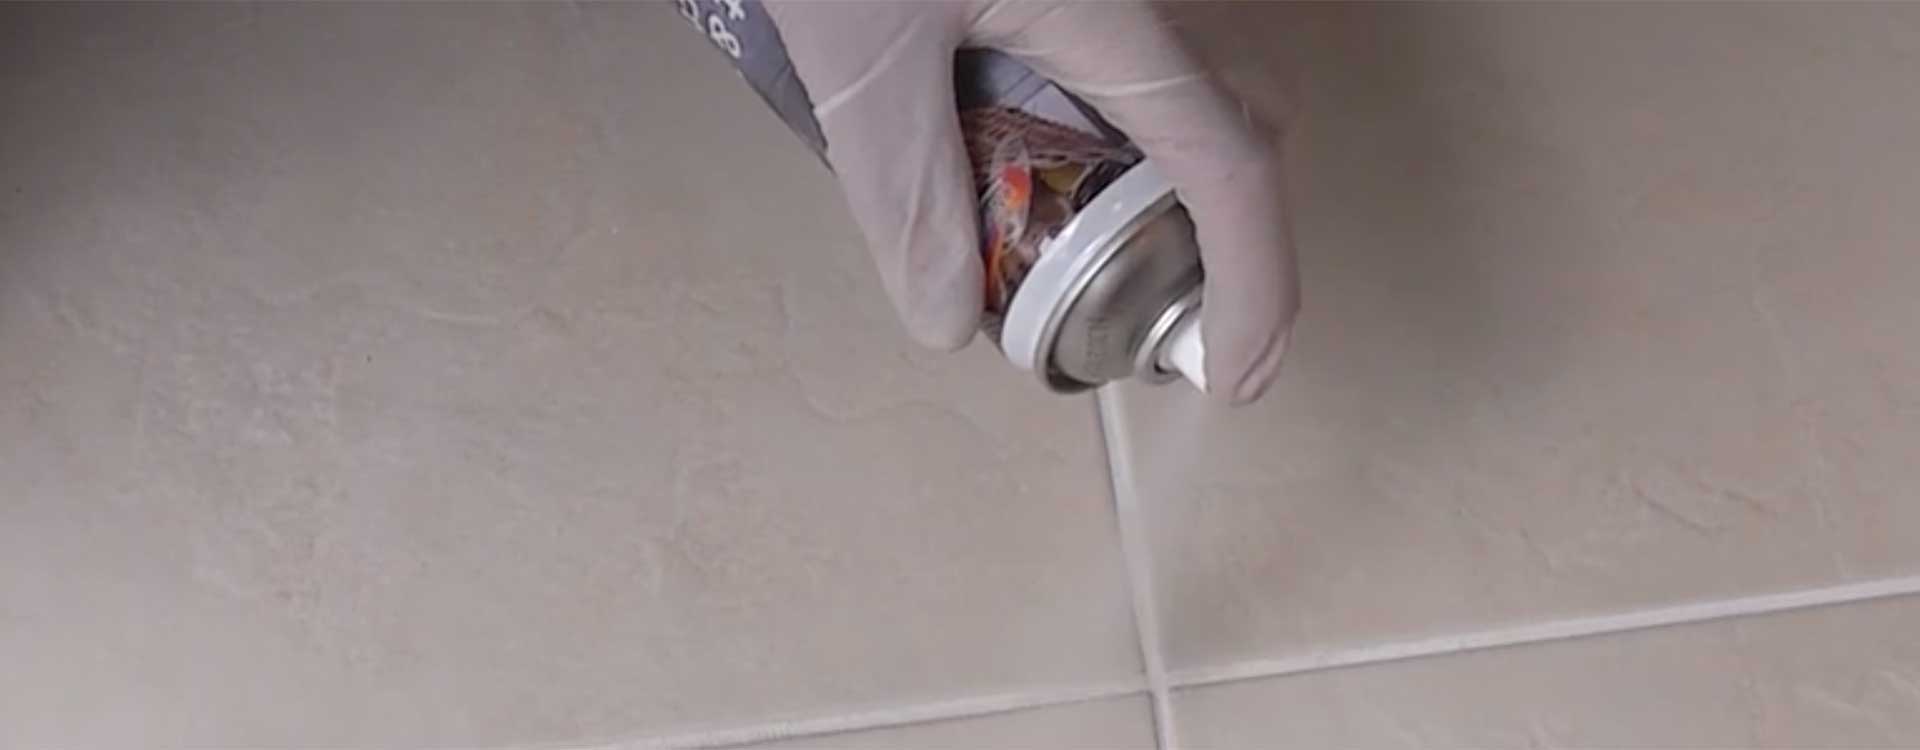 How Long Does Grout Sealer Take To Dry, How To Apply Grout Sealer On Porcelain Tile